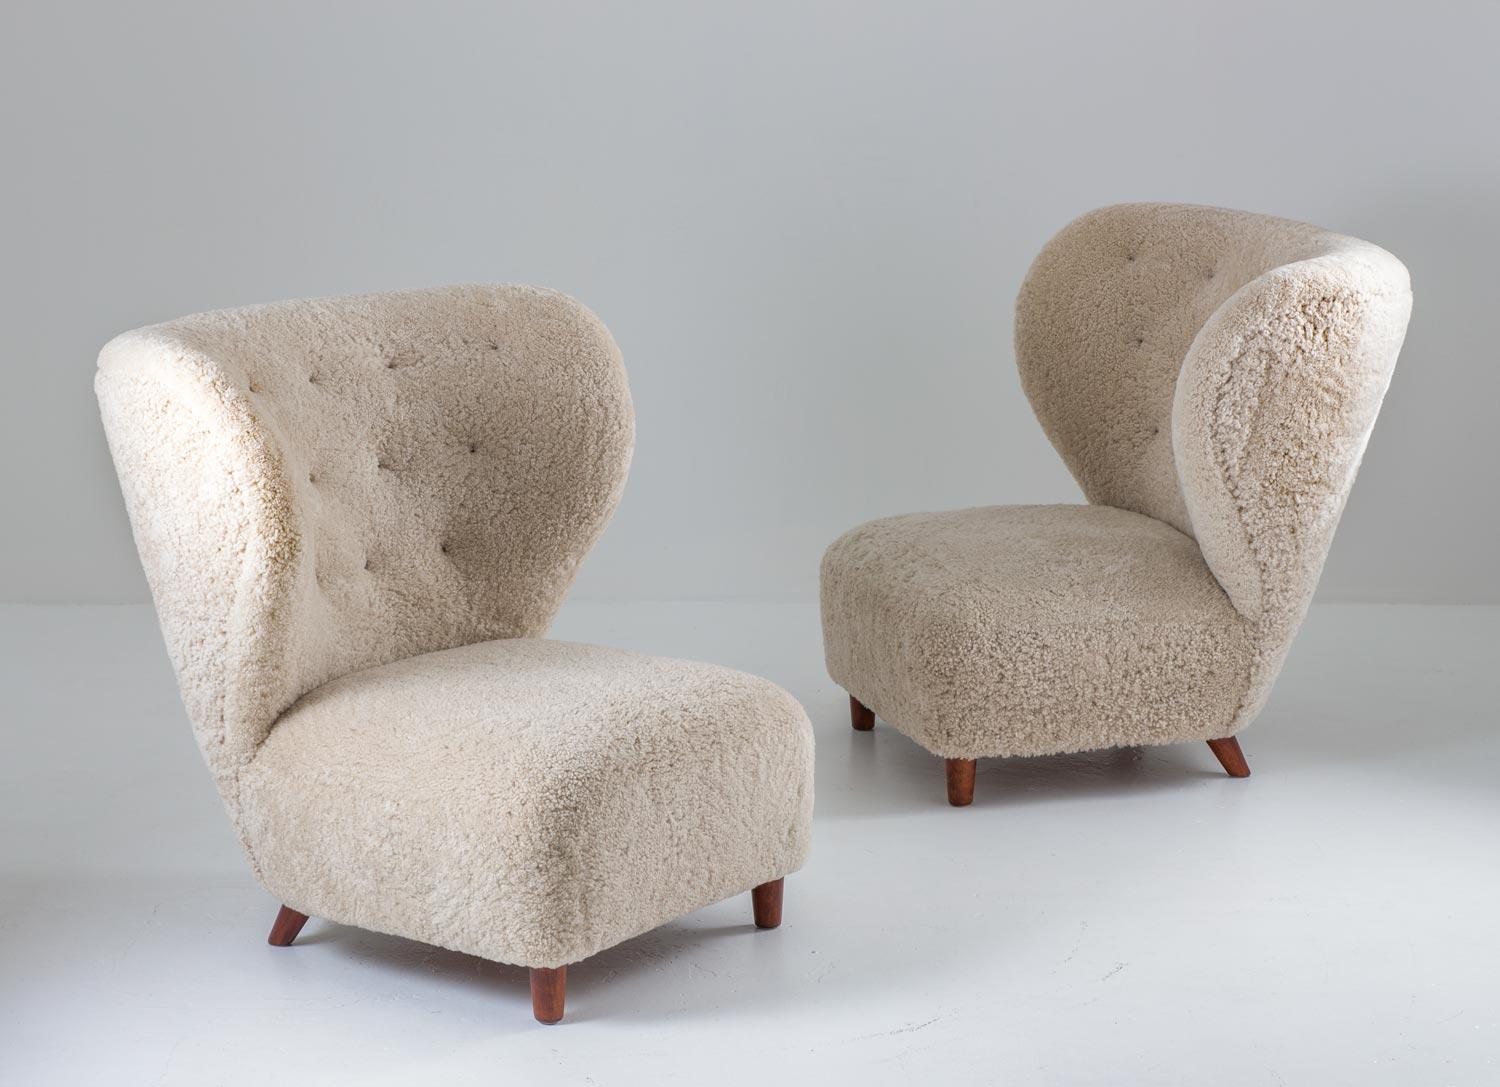 Pair of oversized sheepskin chairs by Danish cabinet maker, circa 1930.
These amazing chairs looks beautiful from any angle. They have been upholstered in off-white sheepskin with cognac leather buttons.

Condition: Excellent, fully restored and